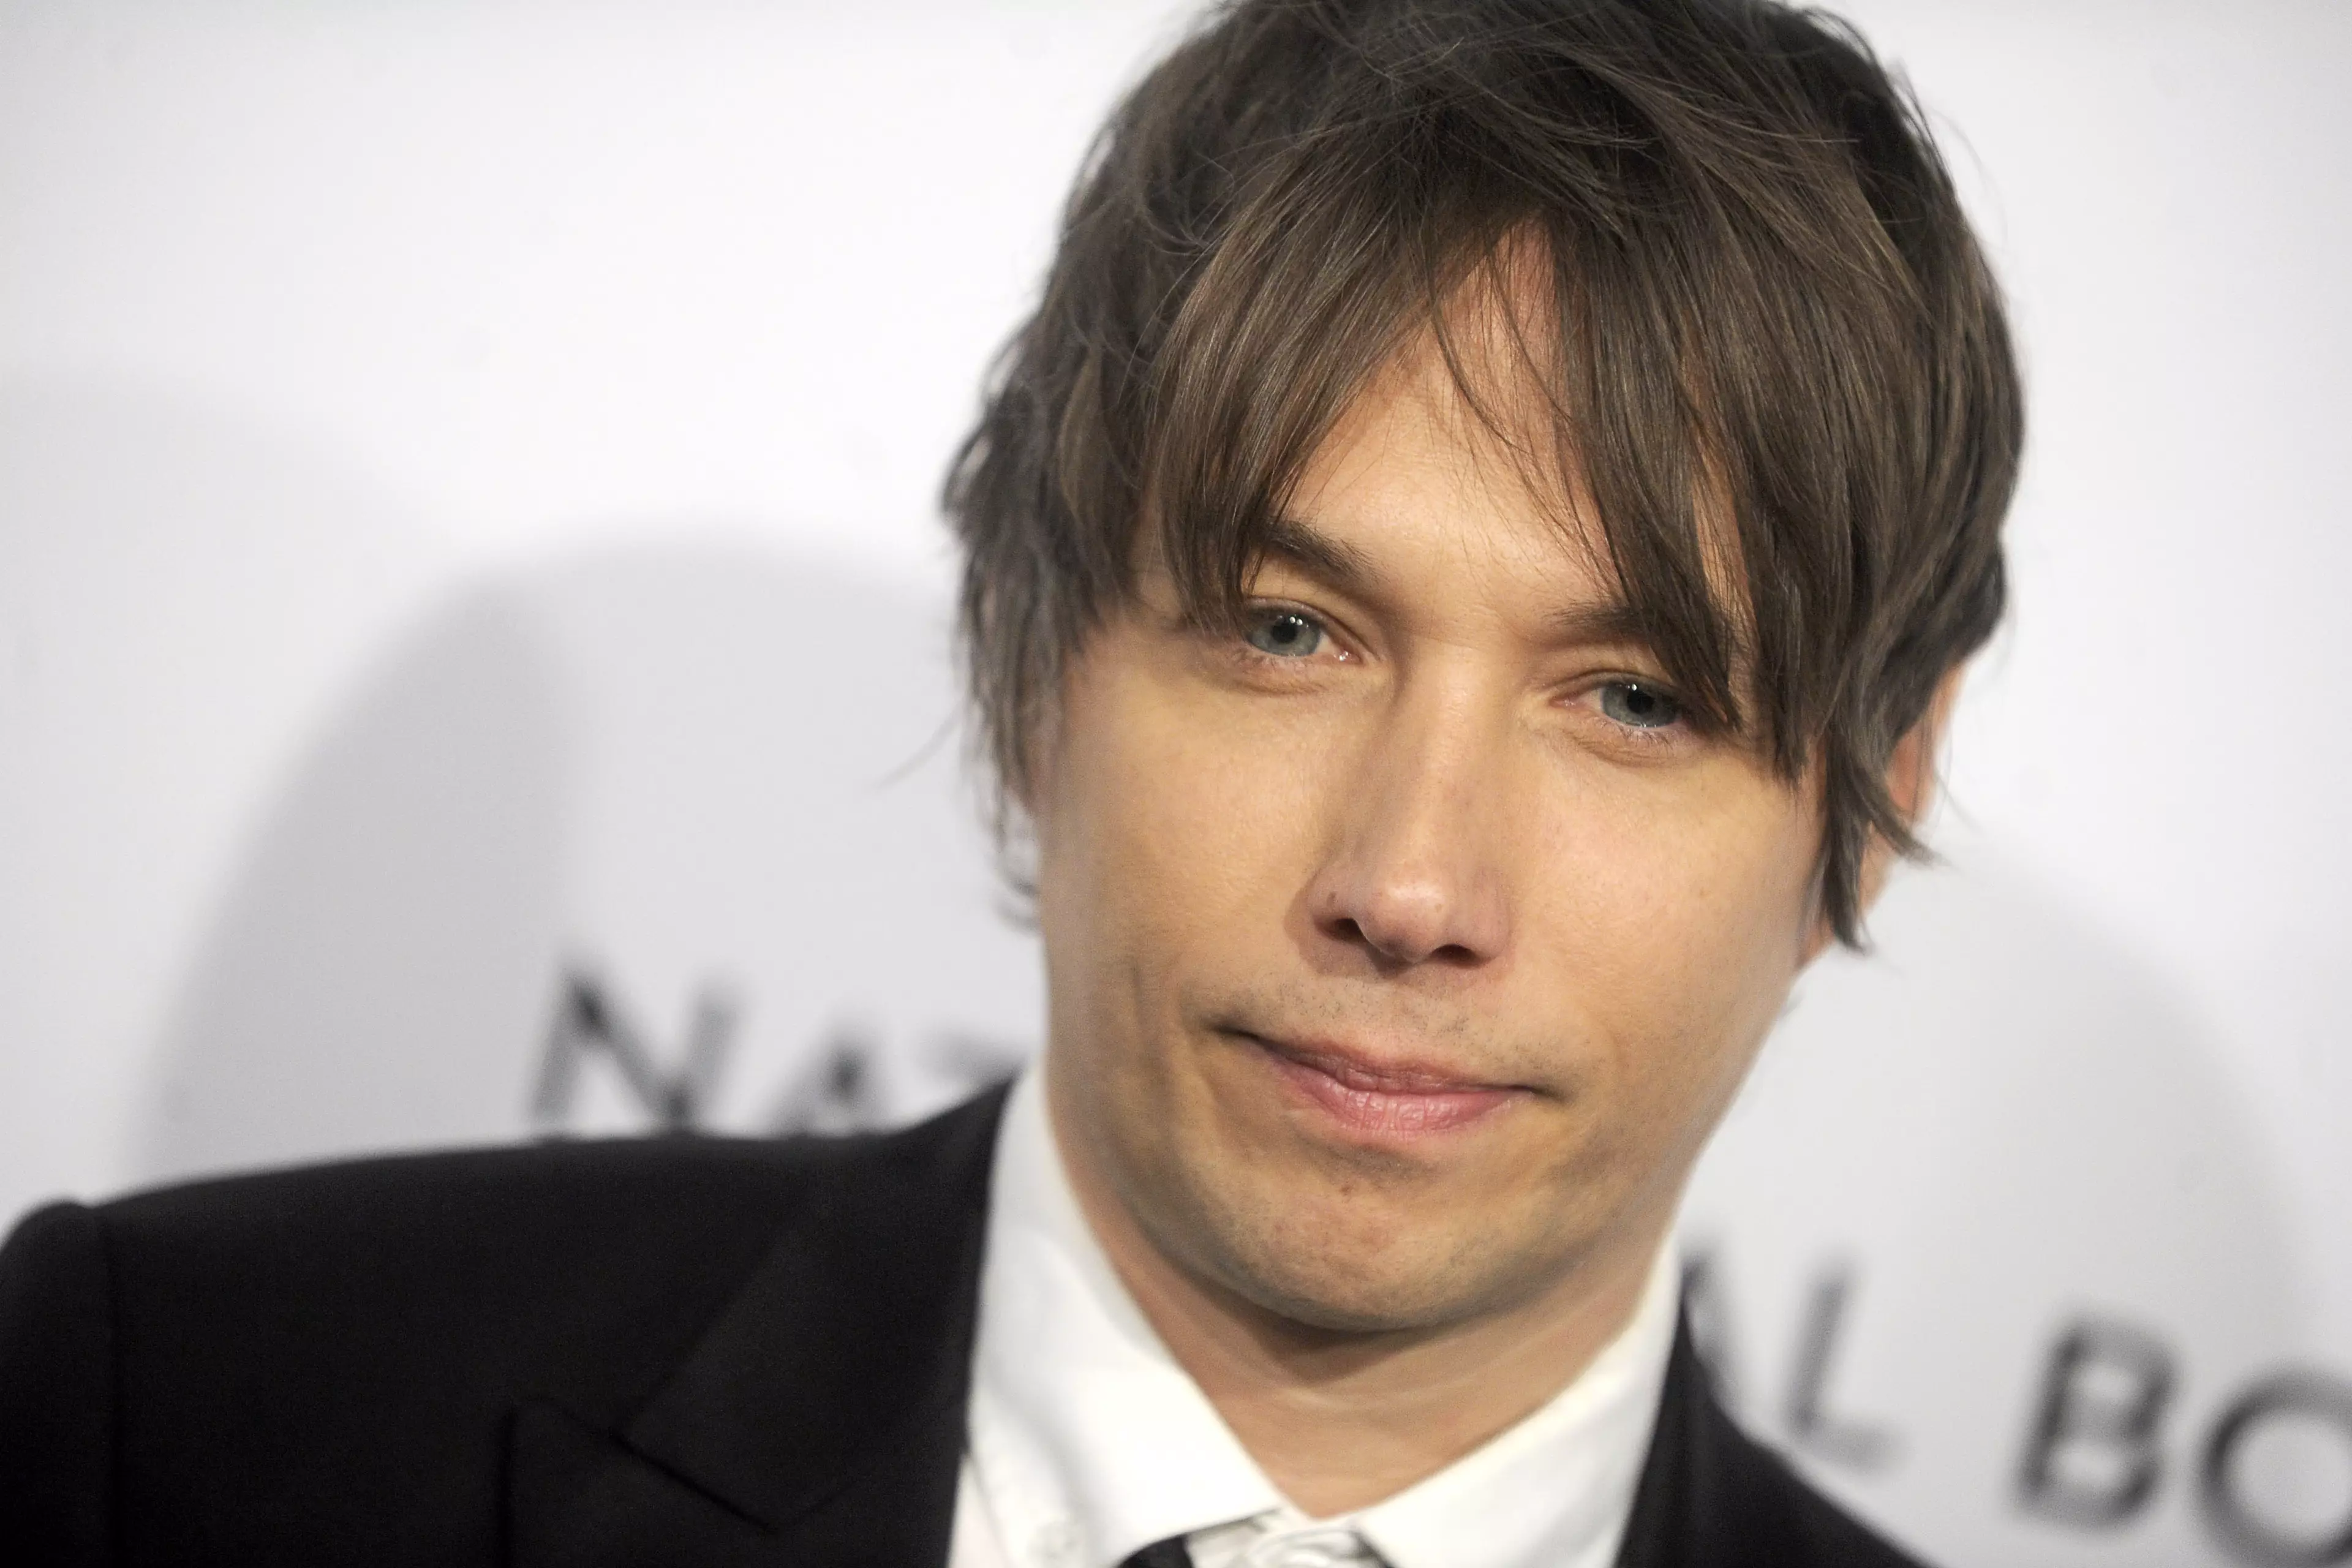 Sean Baker denies involvement in the project with Thorne.